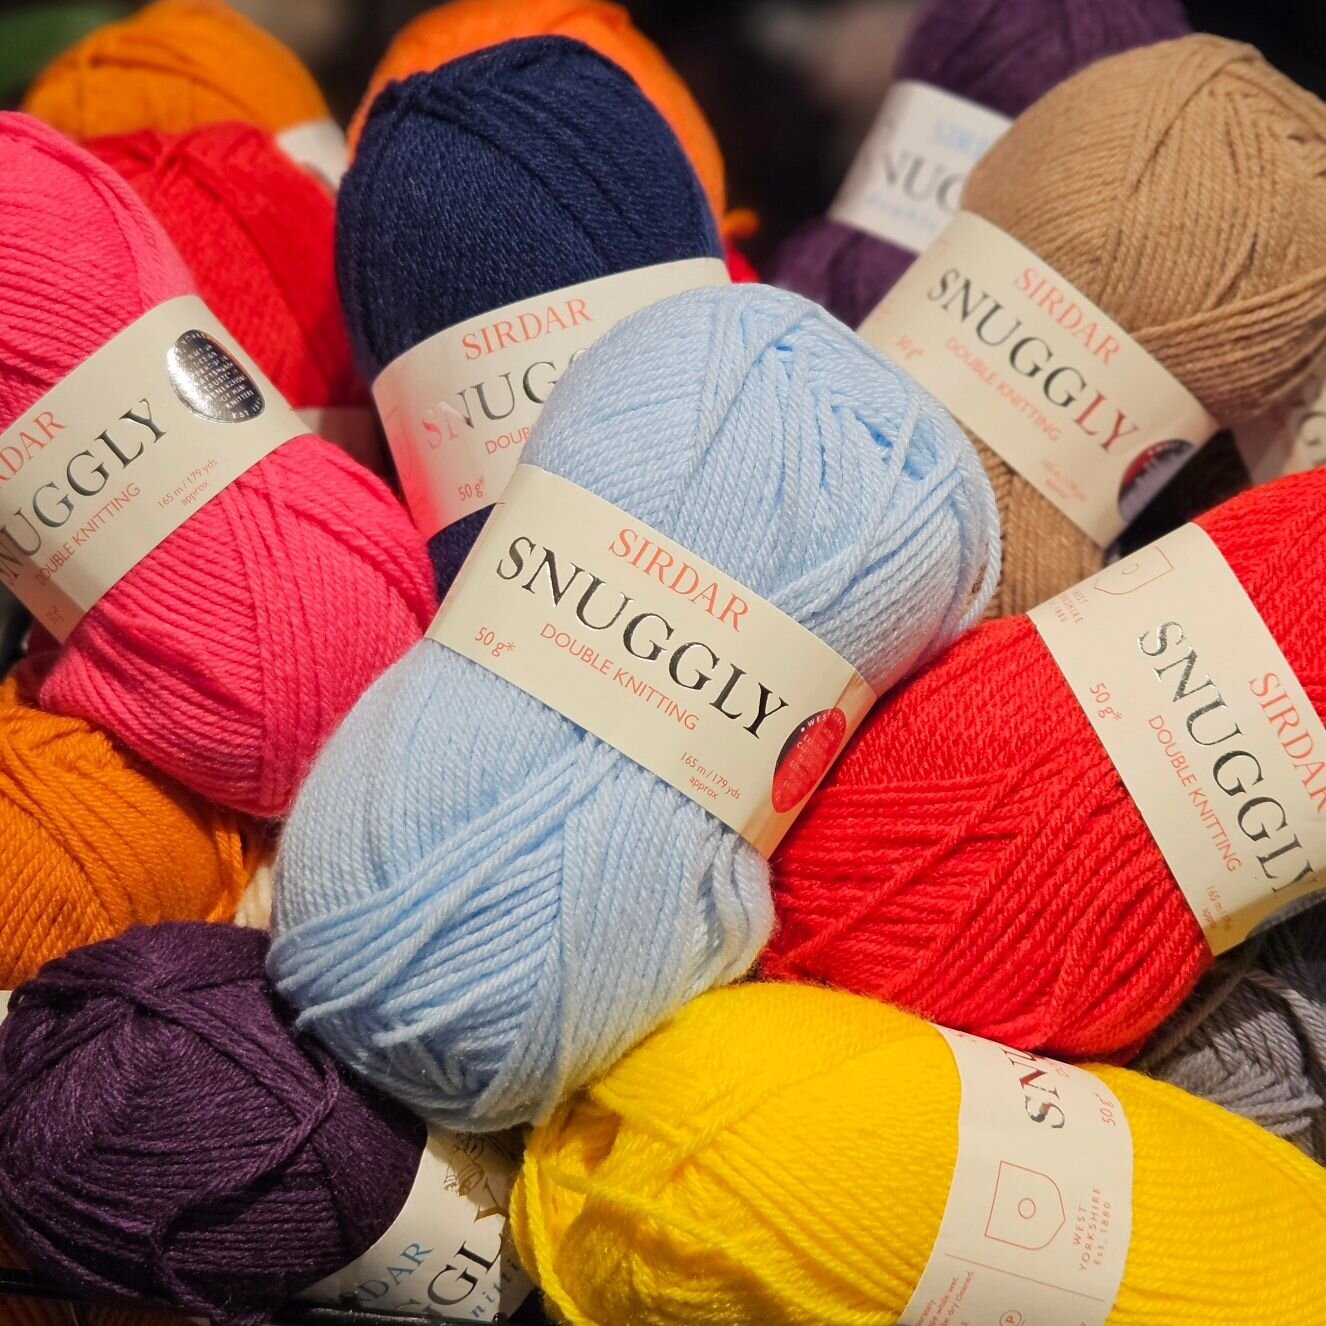 Saying goodbye to some old in preparation for all the new... new year, new yarn, and new projects!

All remaining Sirdar Snuggly DK and Sirdar Snuggly Crofter DK have just been added to our clearance bins.

Priced to sell at $3.75 per ball
Available 